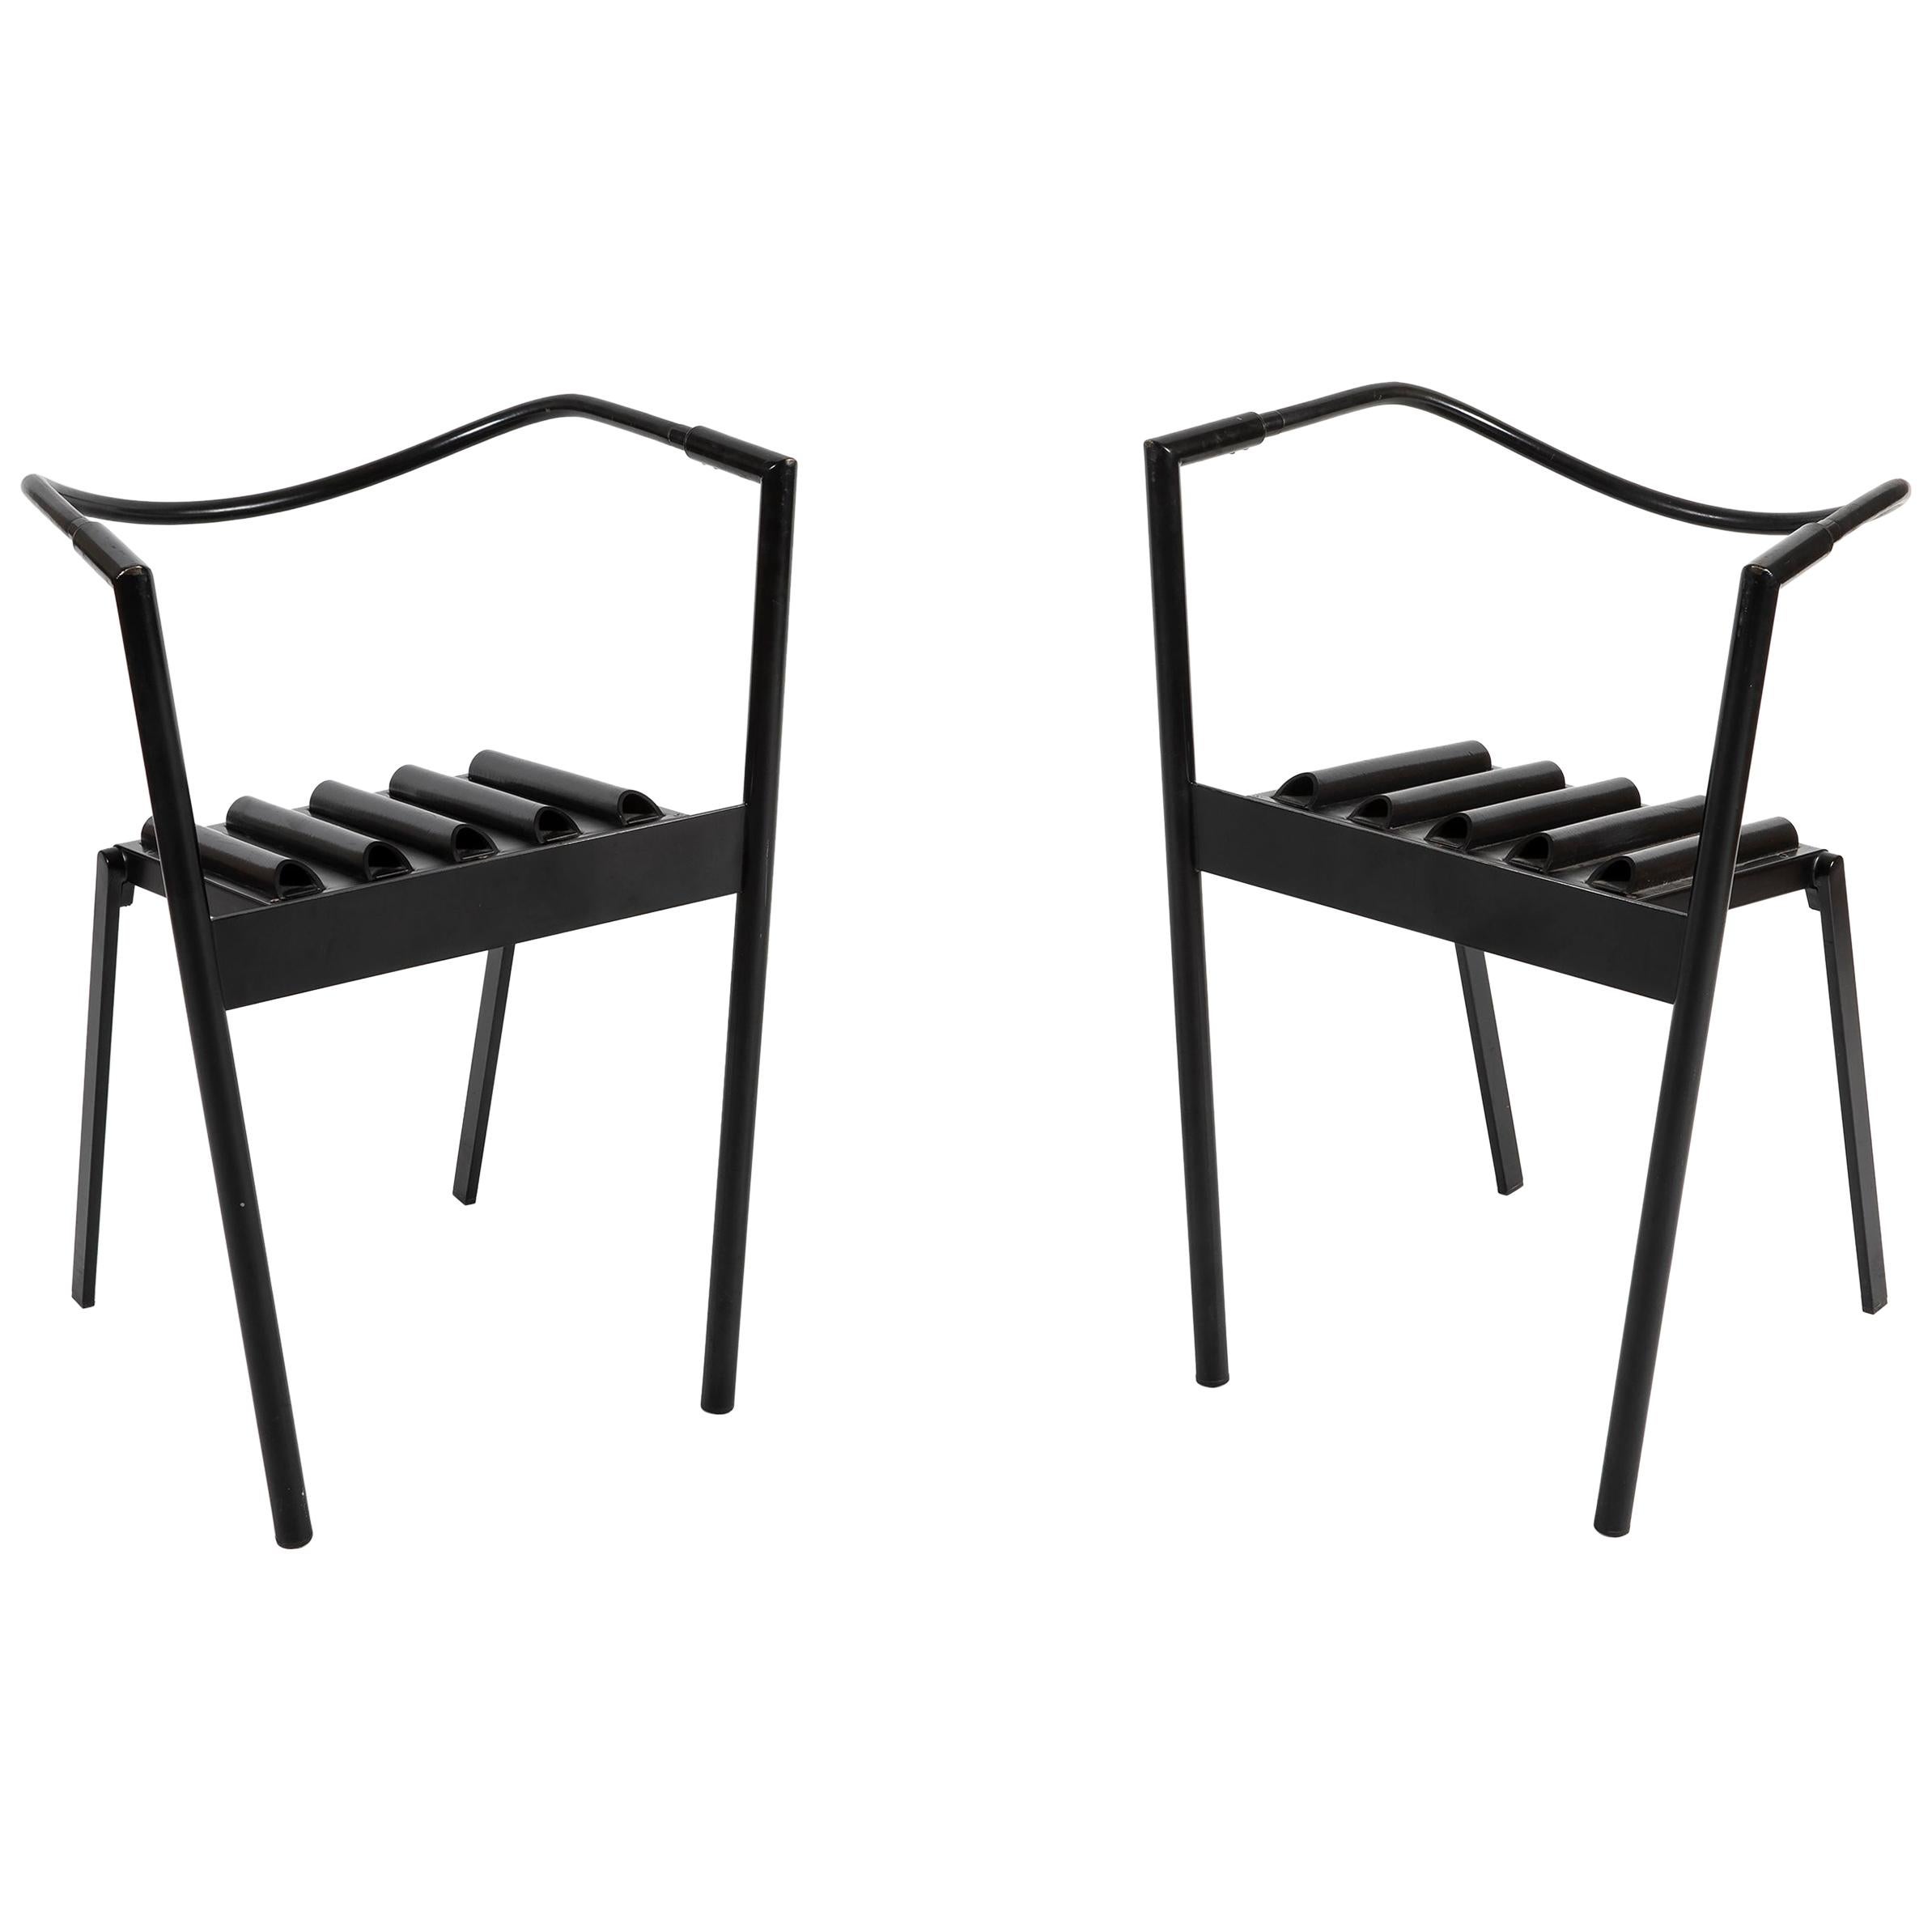 Paolo Pallucco and Mireille Rivier Set of 2 Hans e Alice Steel and Rubber Chairs